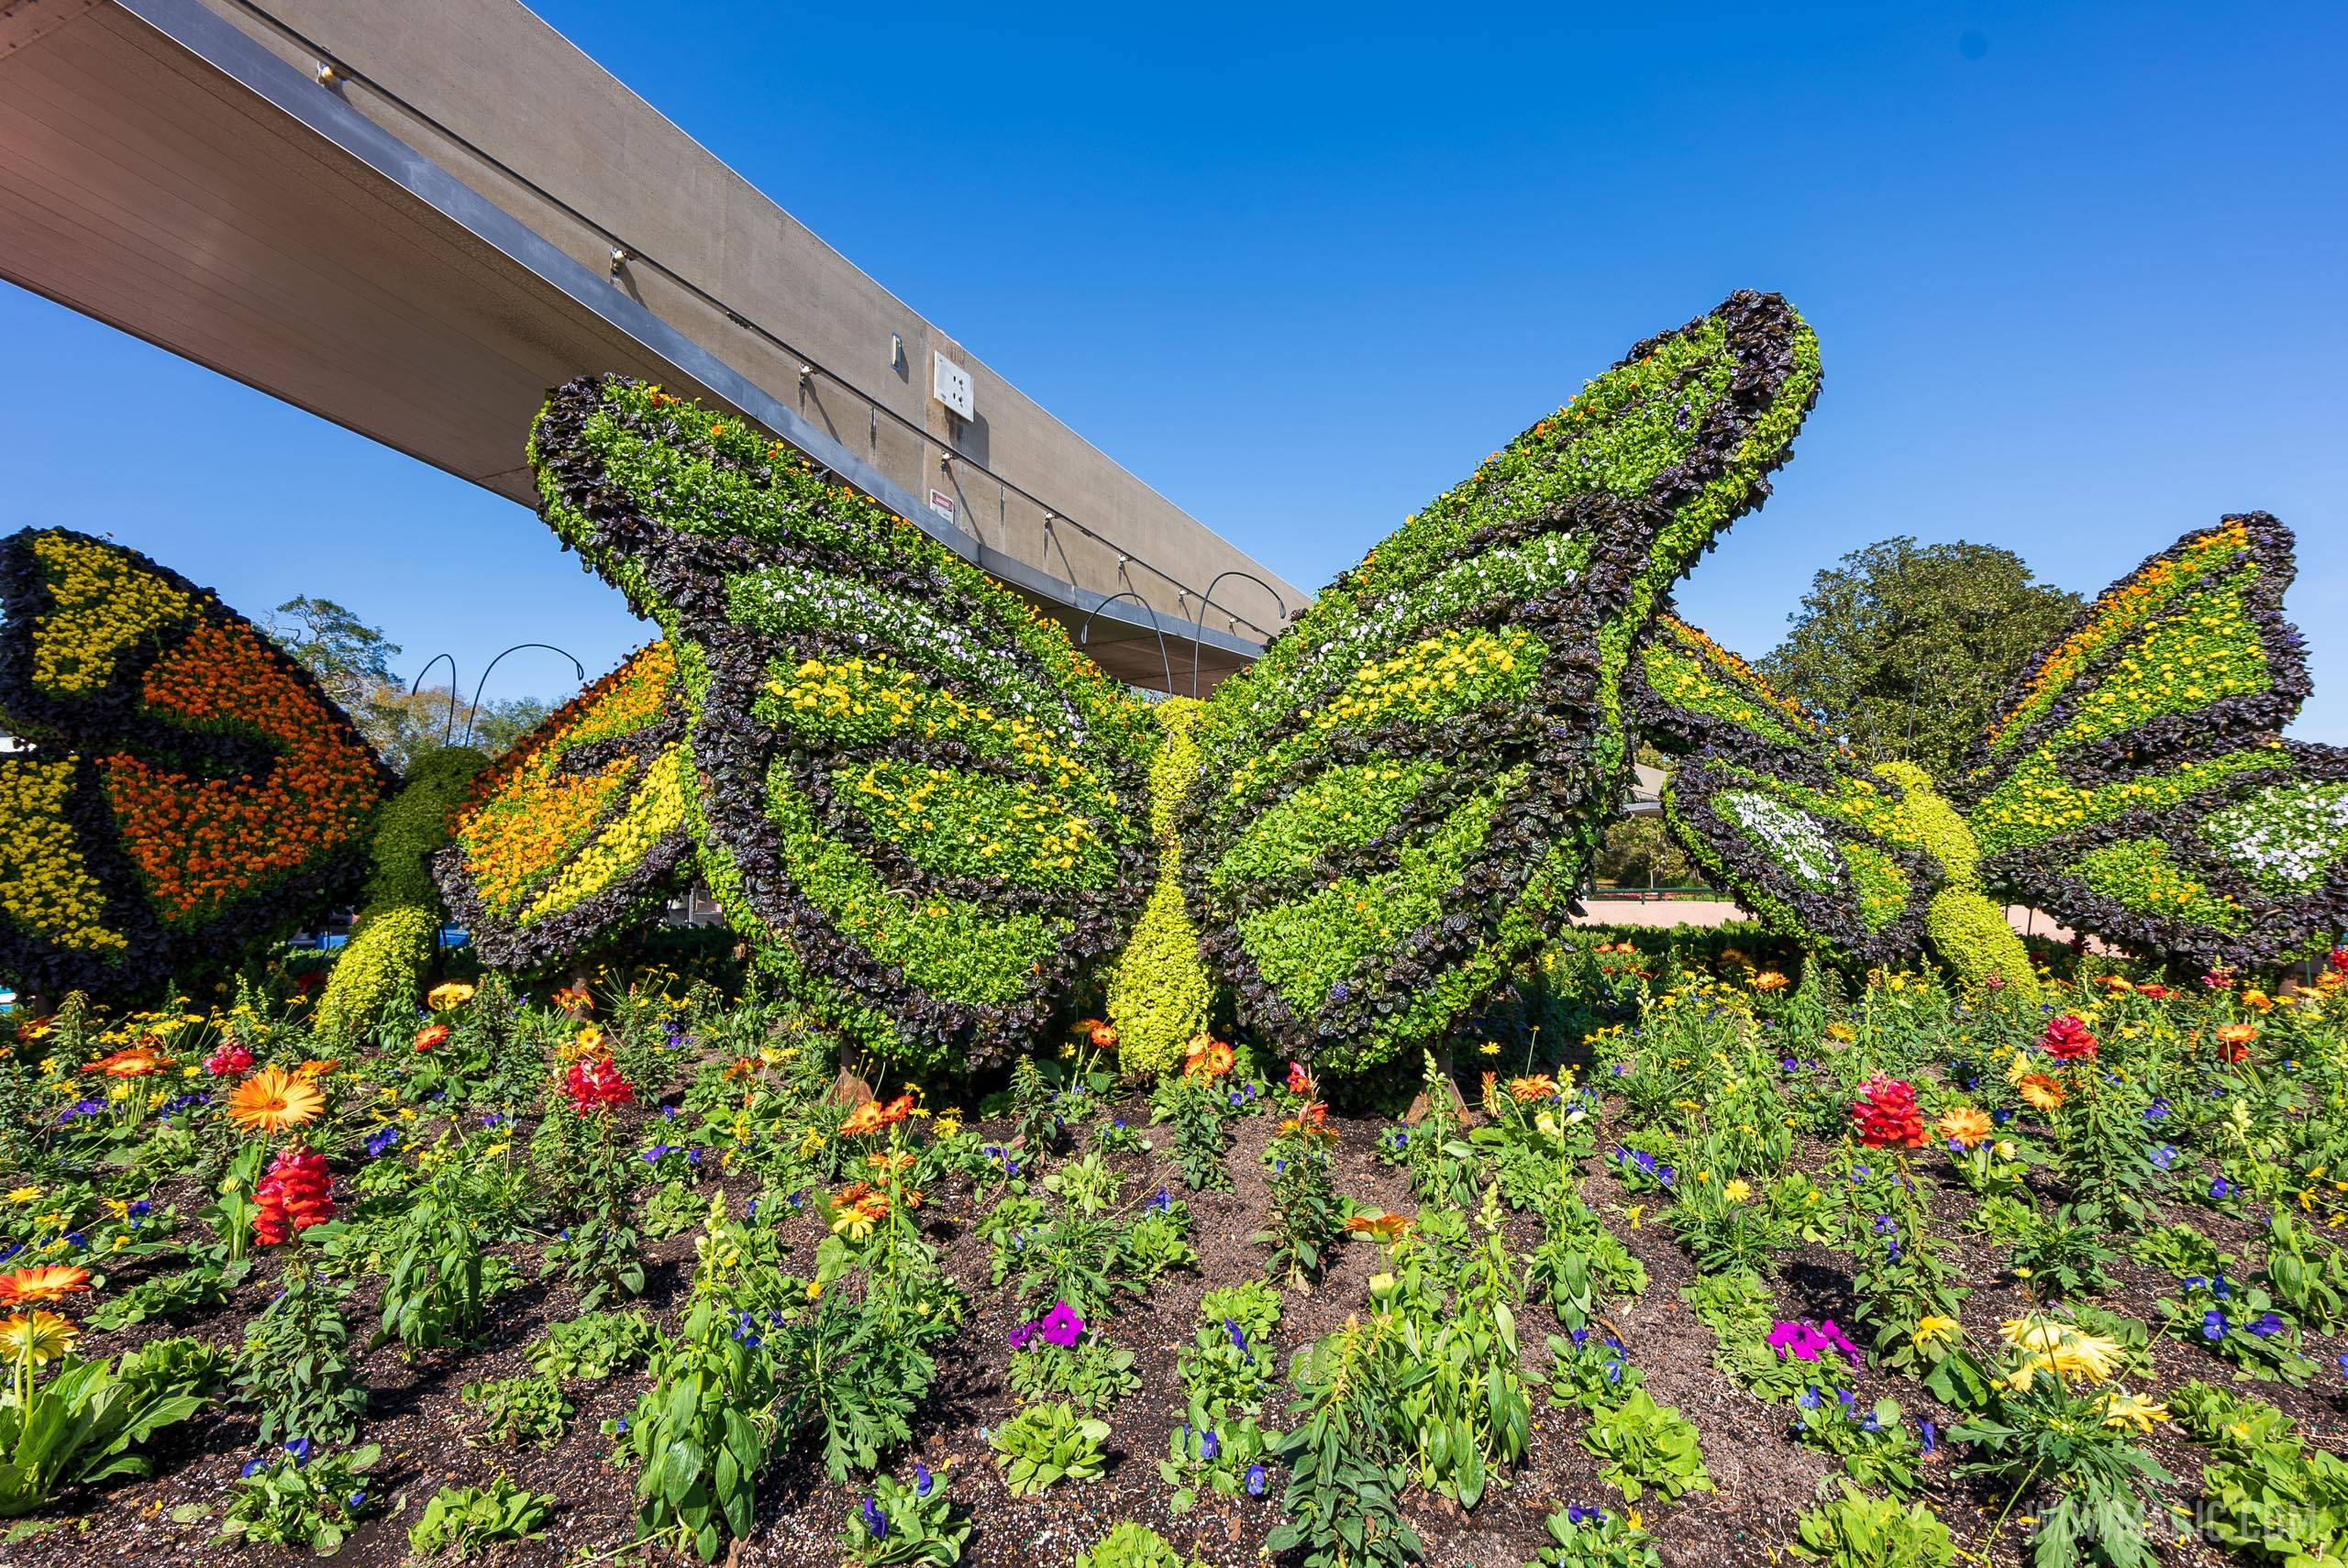 PHOTOS - First topiary in place as preparations continue for the 2021 EPCOT Flower and Garden Festival